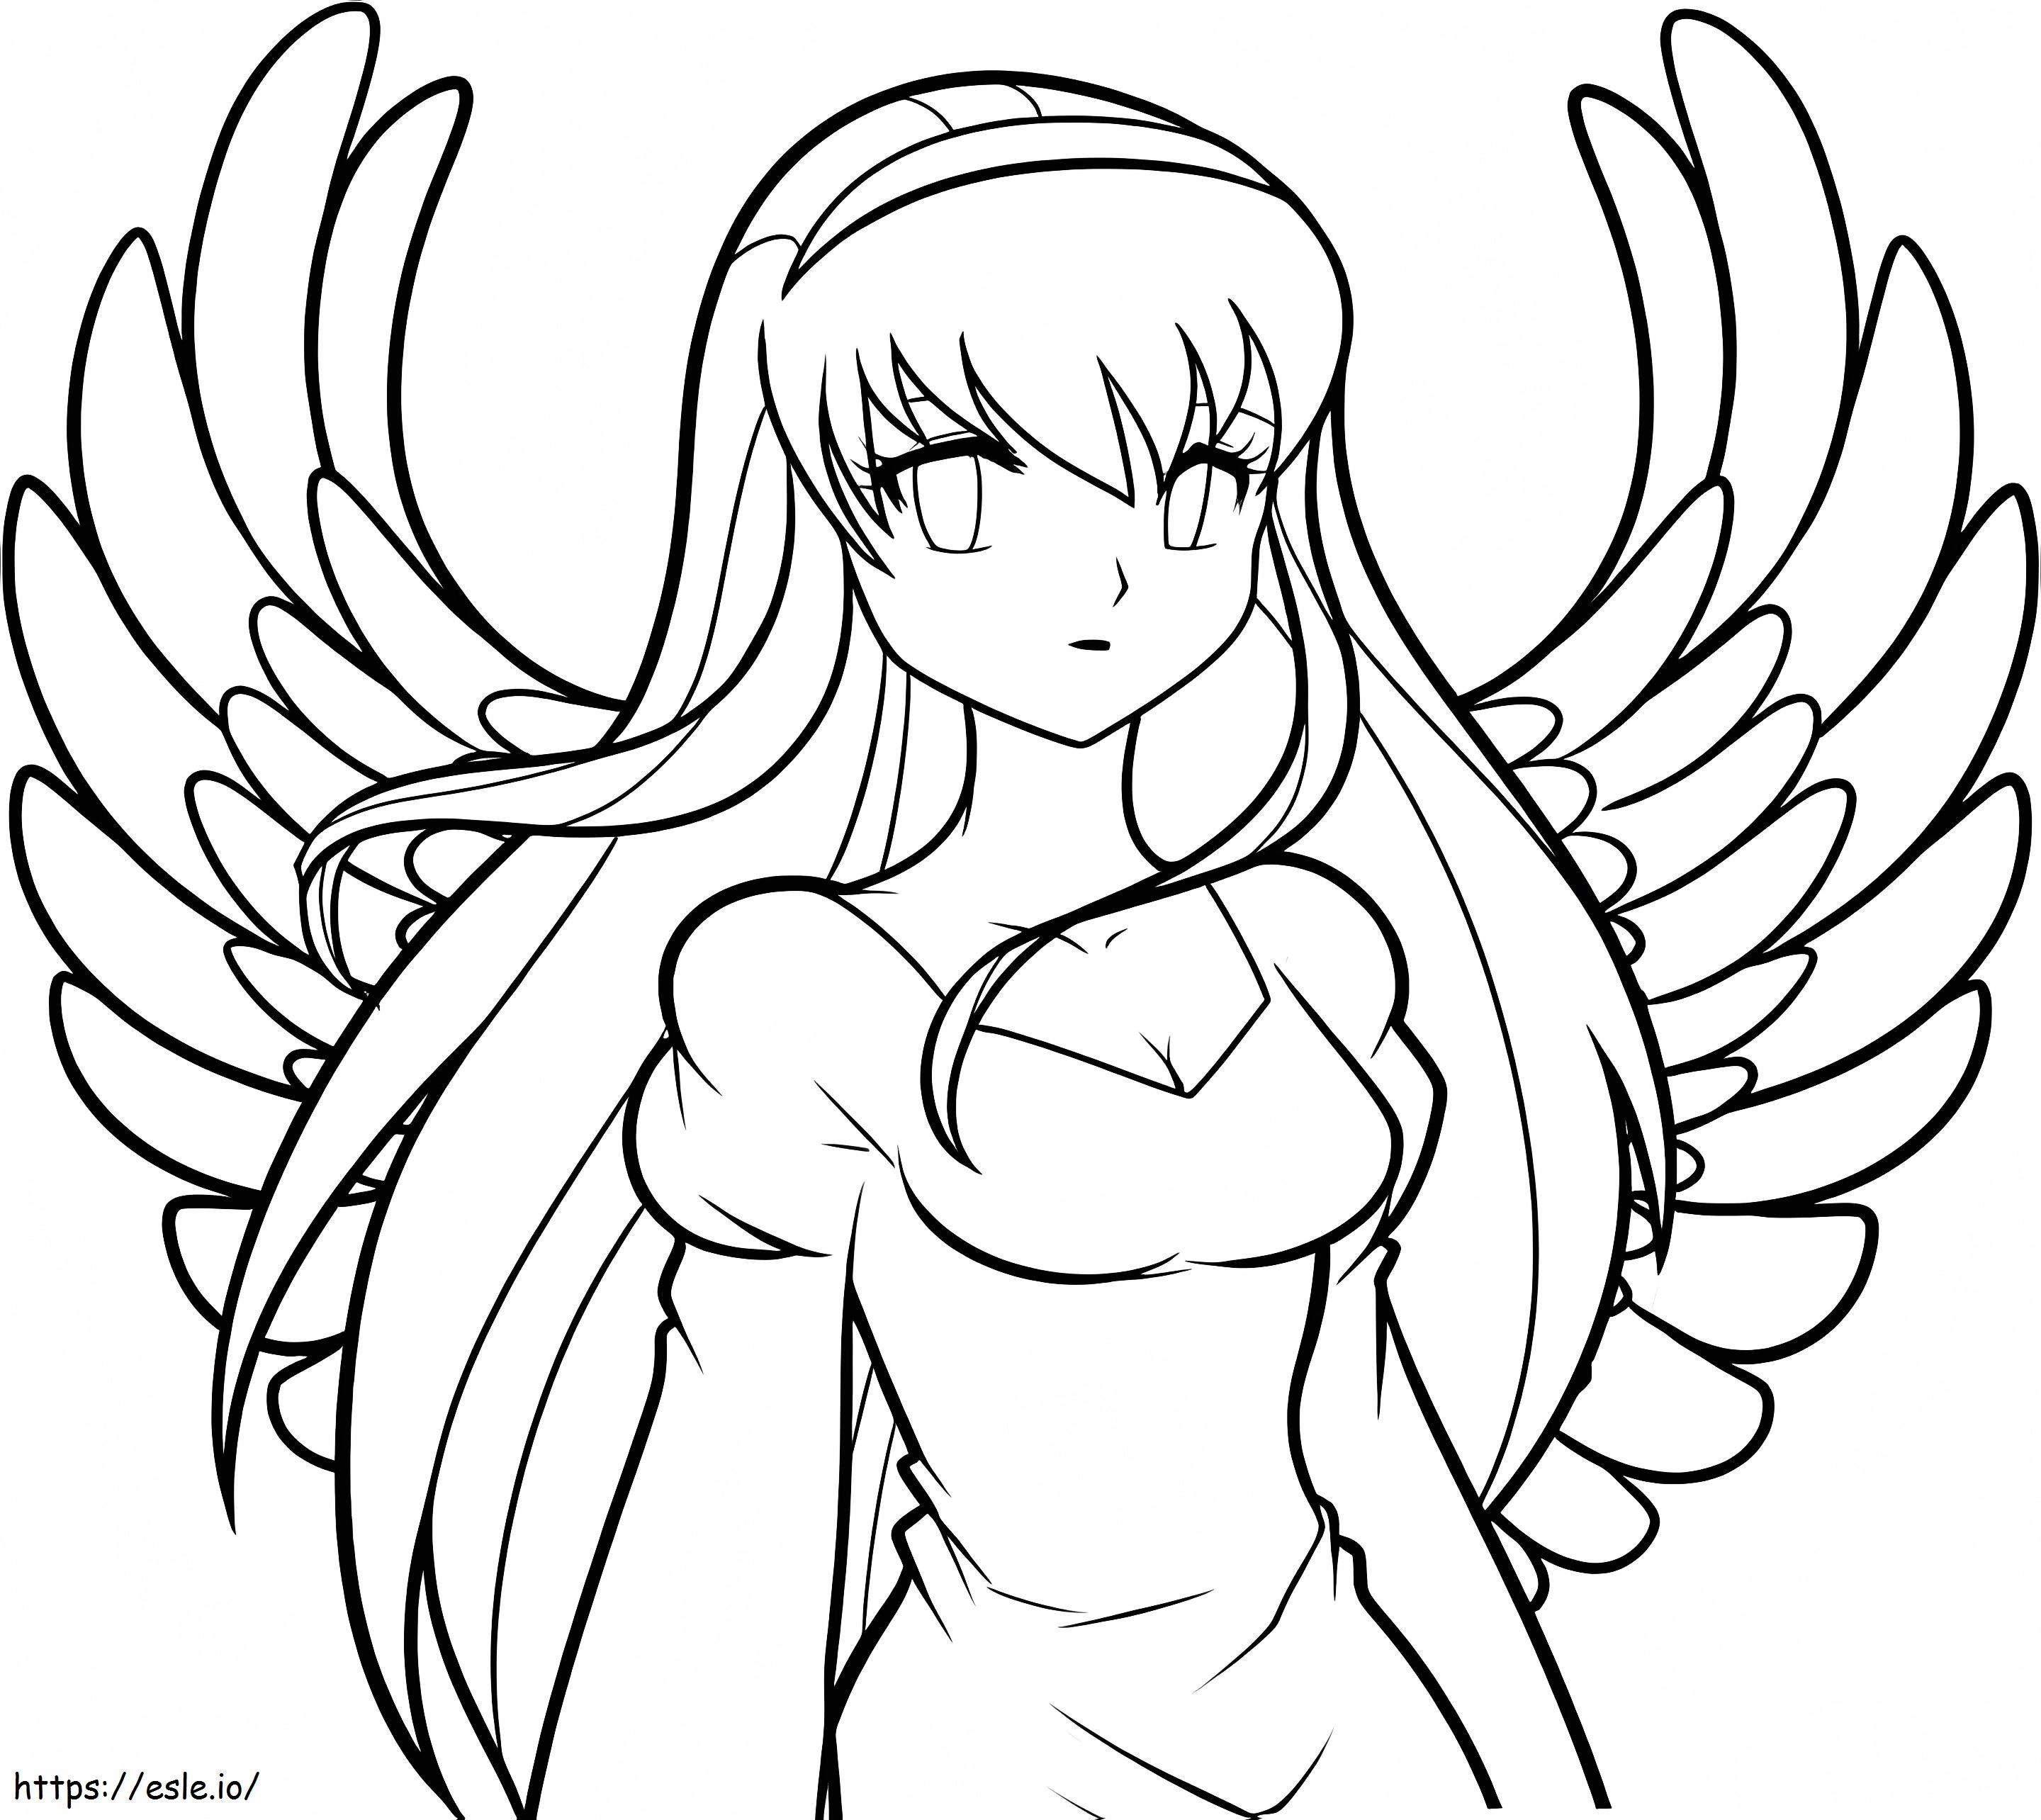 Animated Angel Portrait coloring page